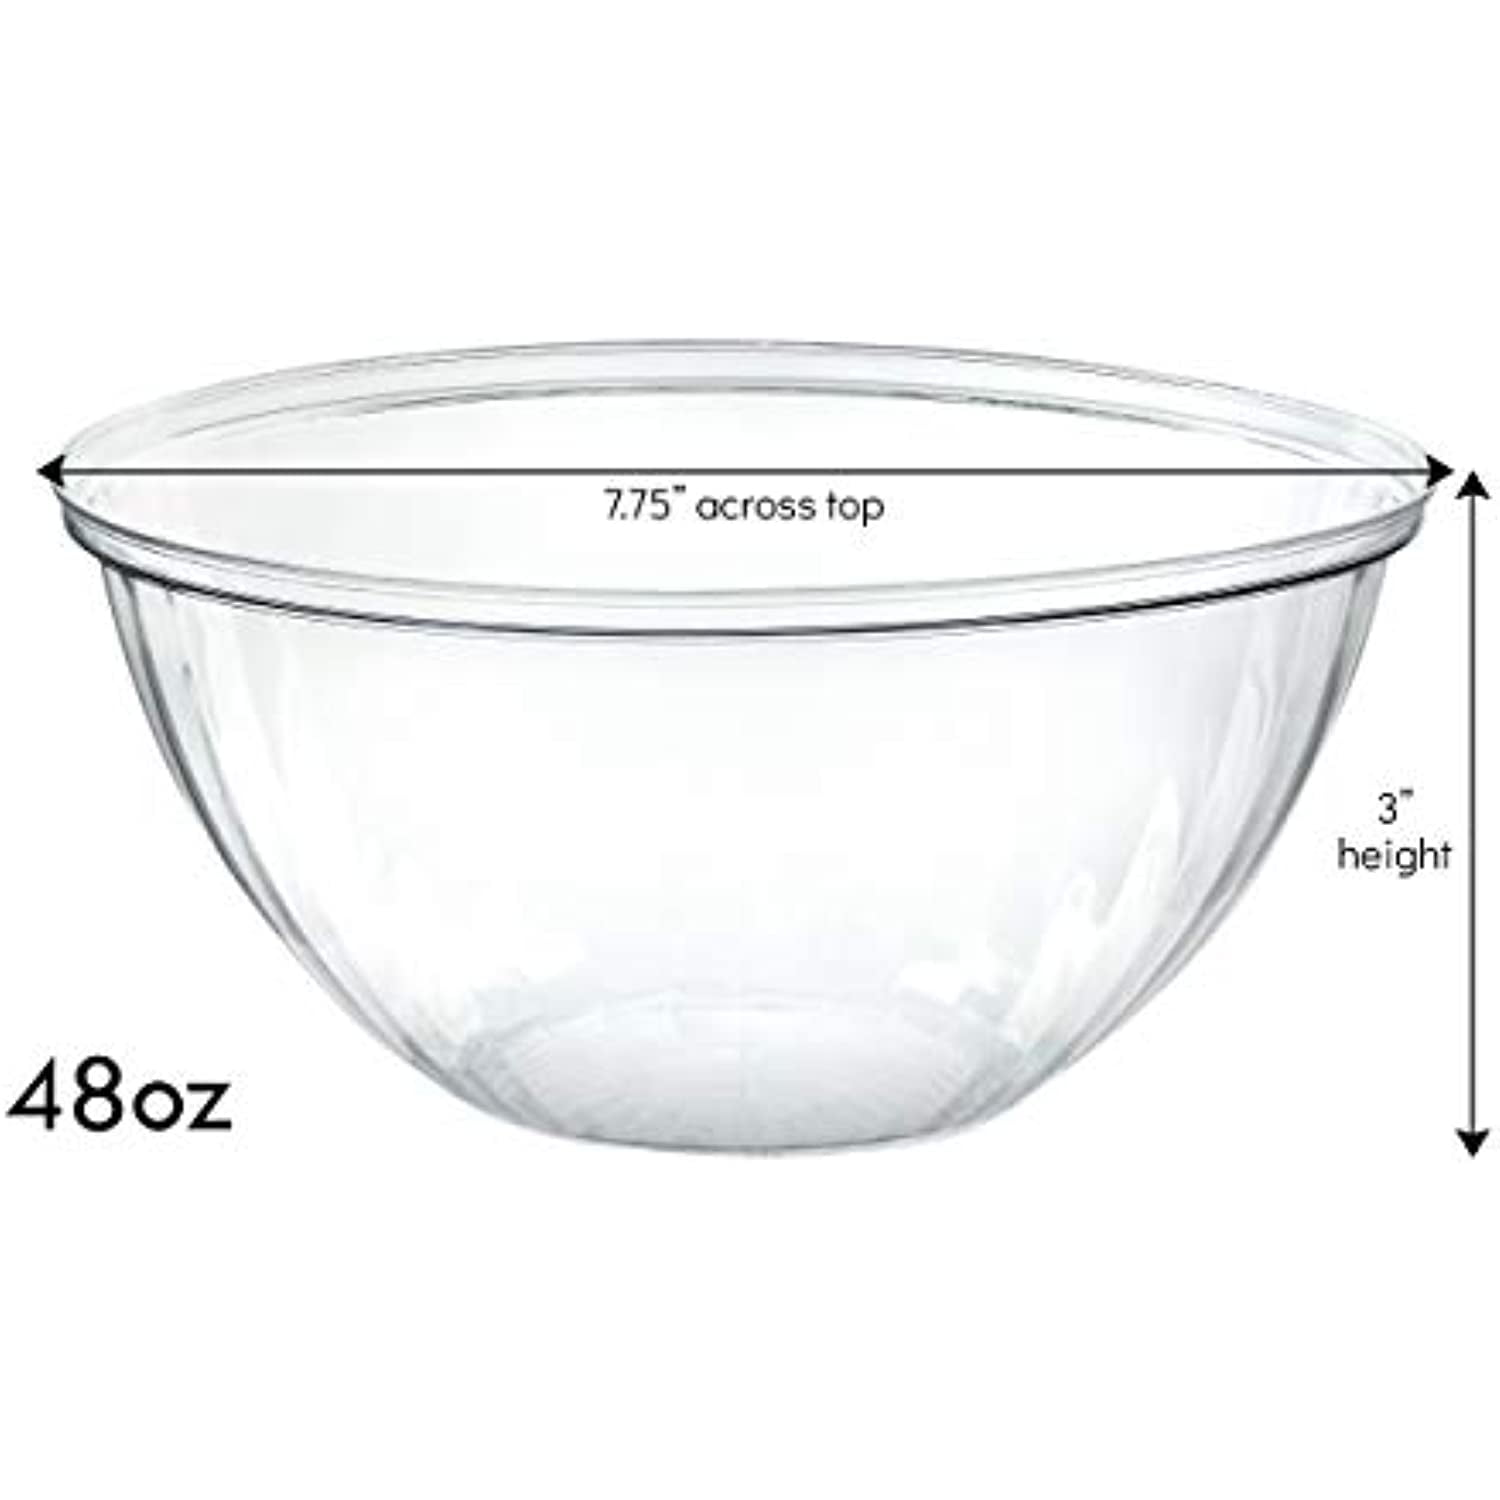 169oz/5000ML SERVING BOWL WITH LID-48